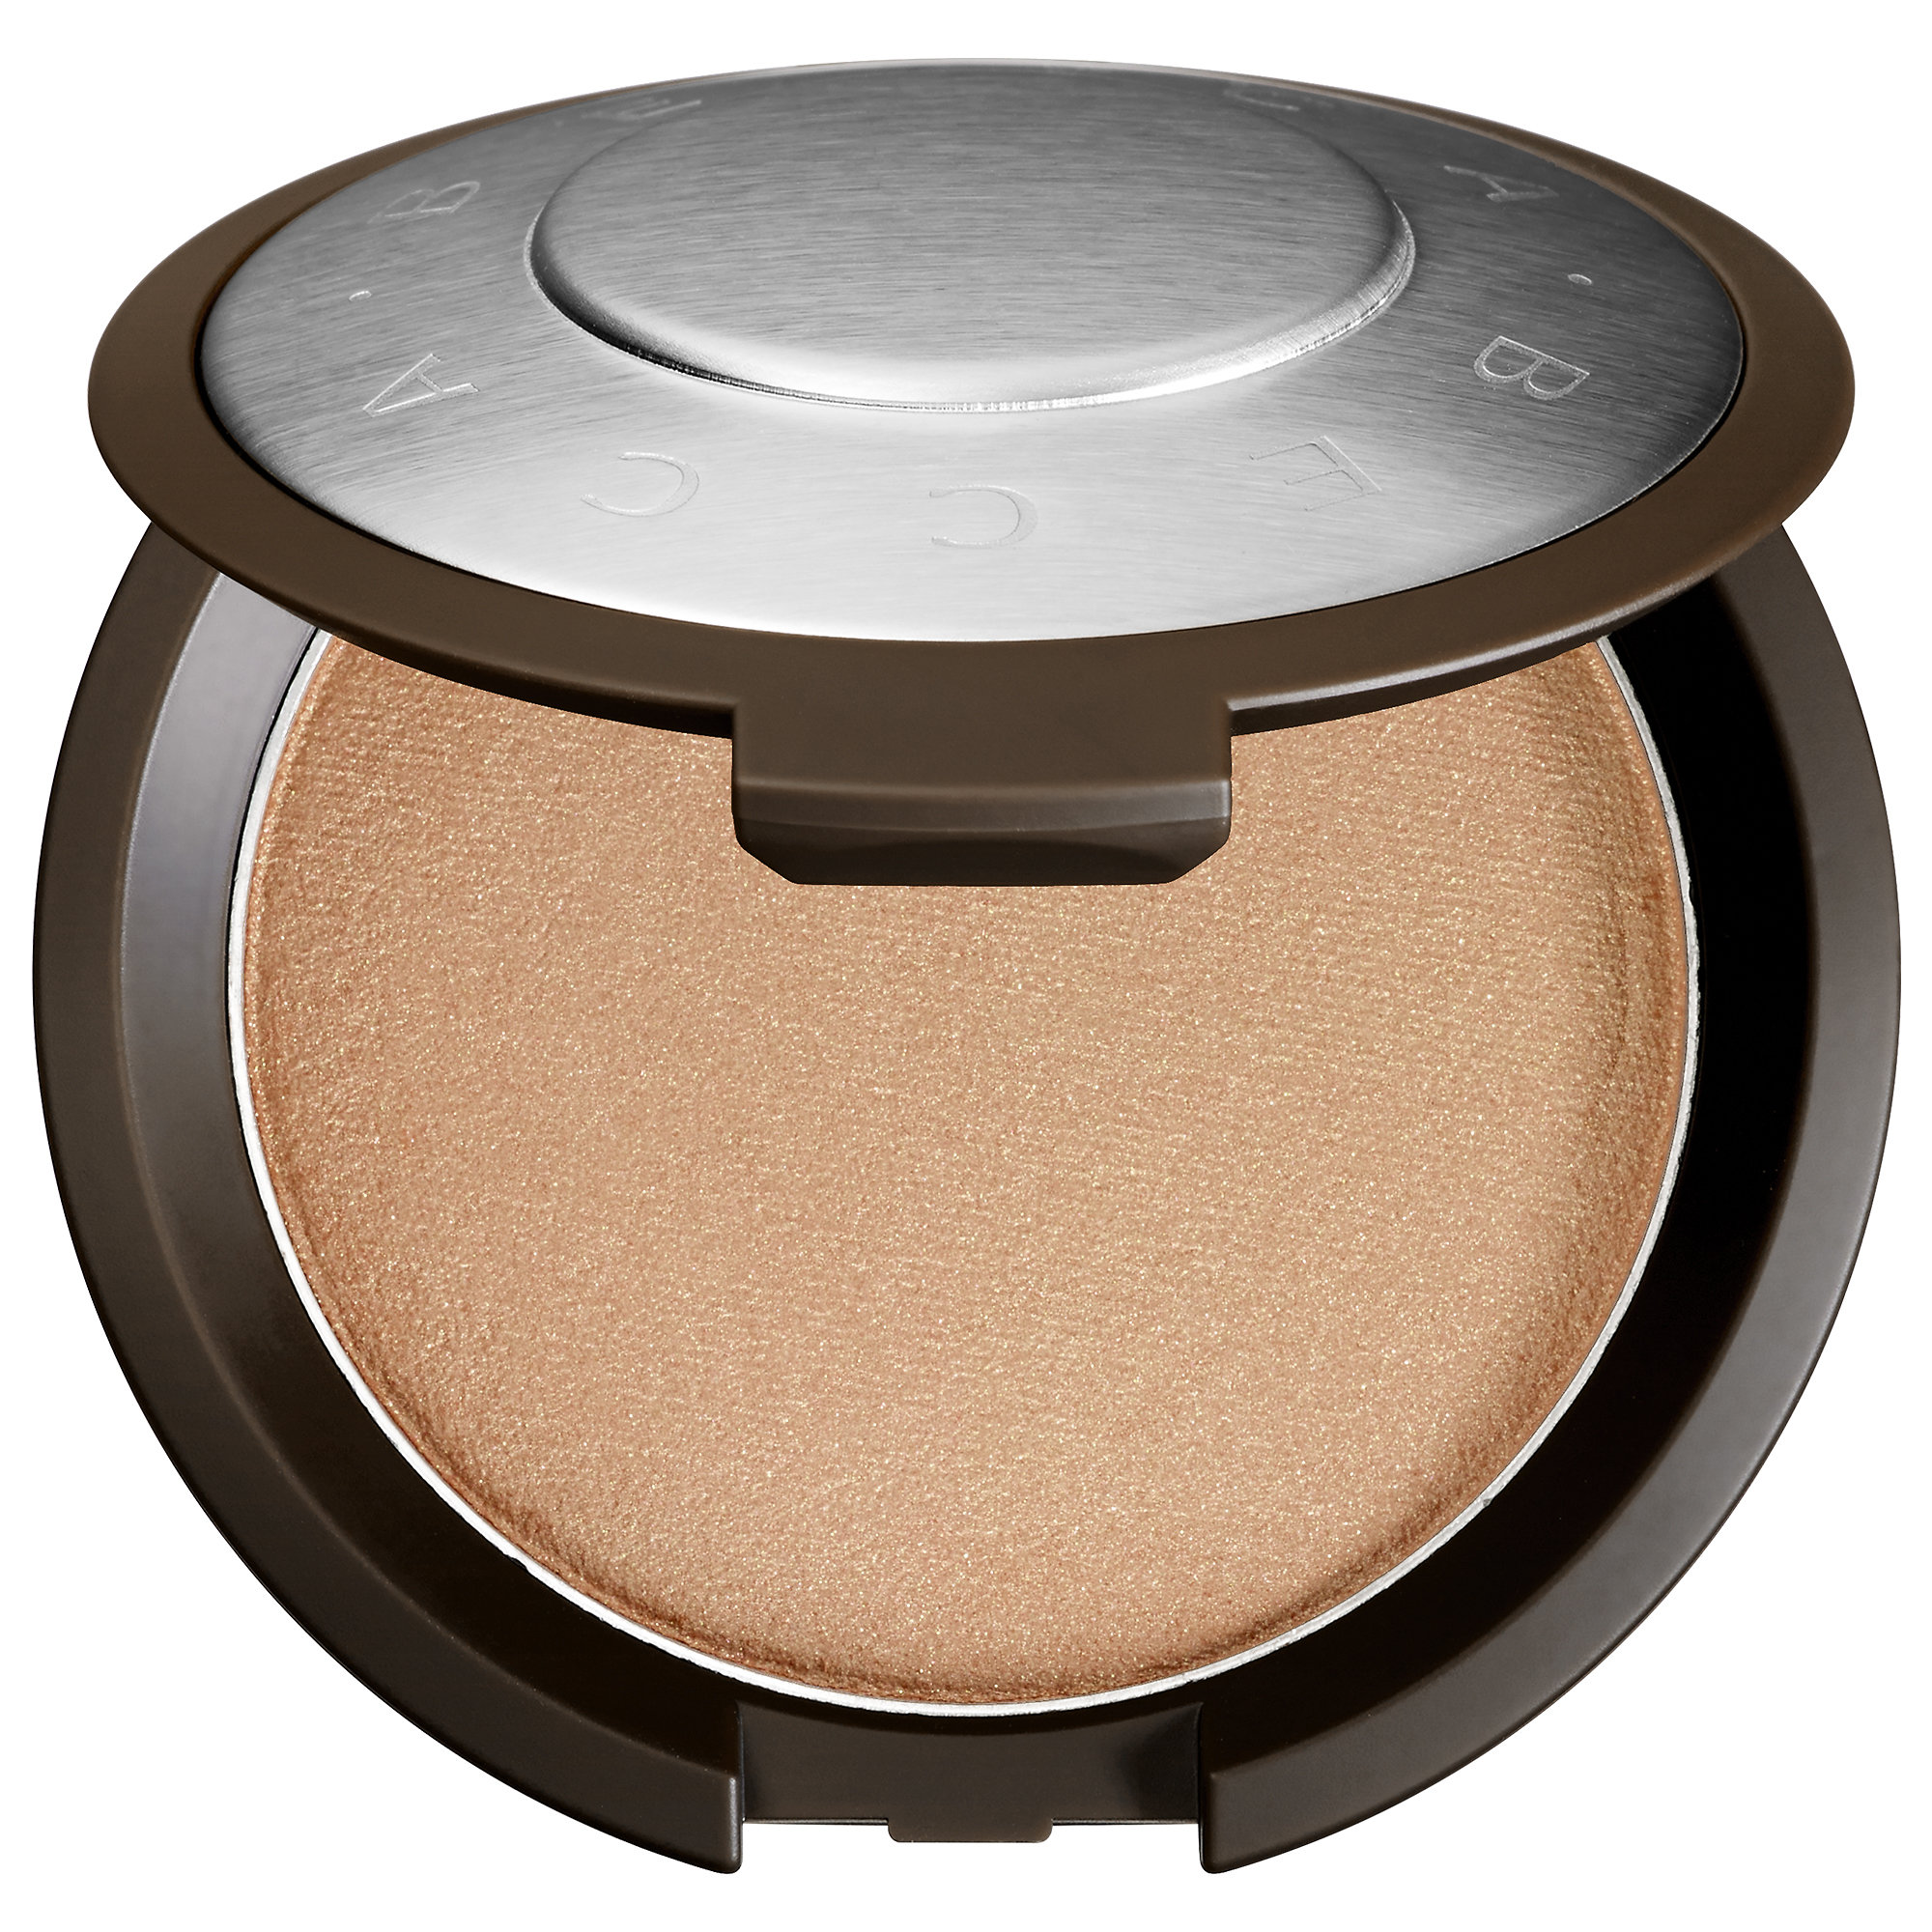 BECCA Shimmering Skin Perfector Pressed Champagne Pop